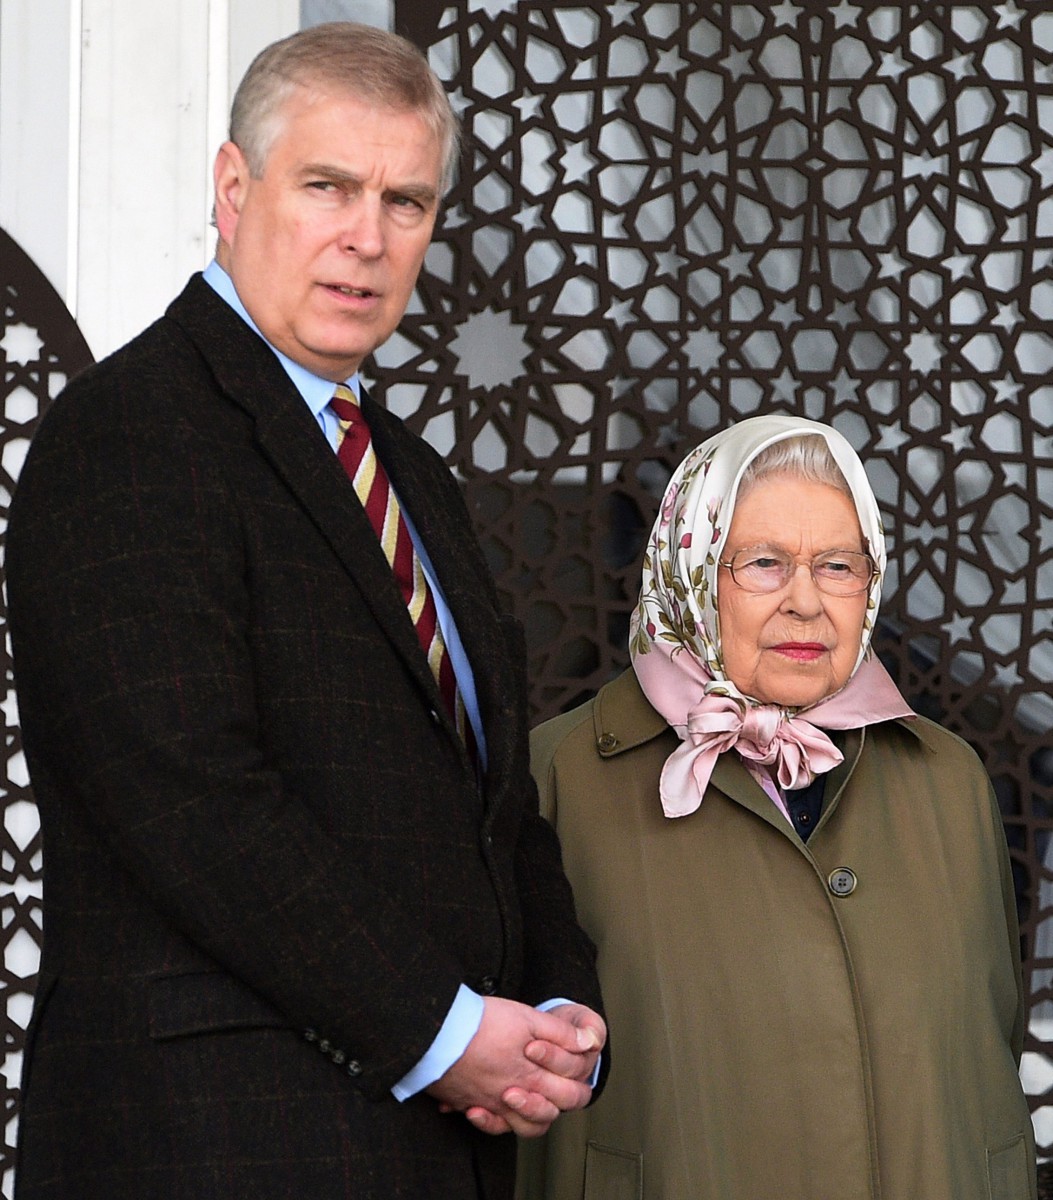 The Queen forced Prince Andrew to step down from royal duties earlier this week